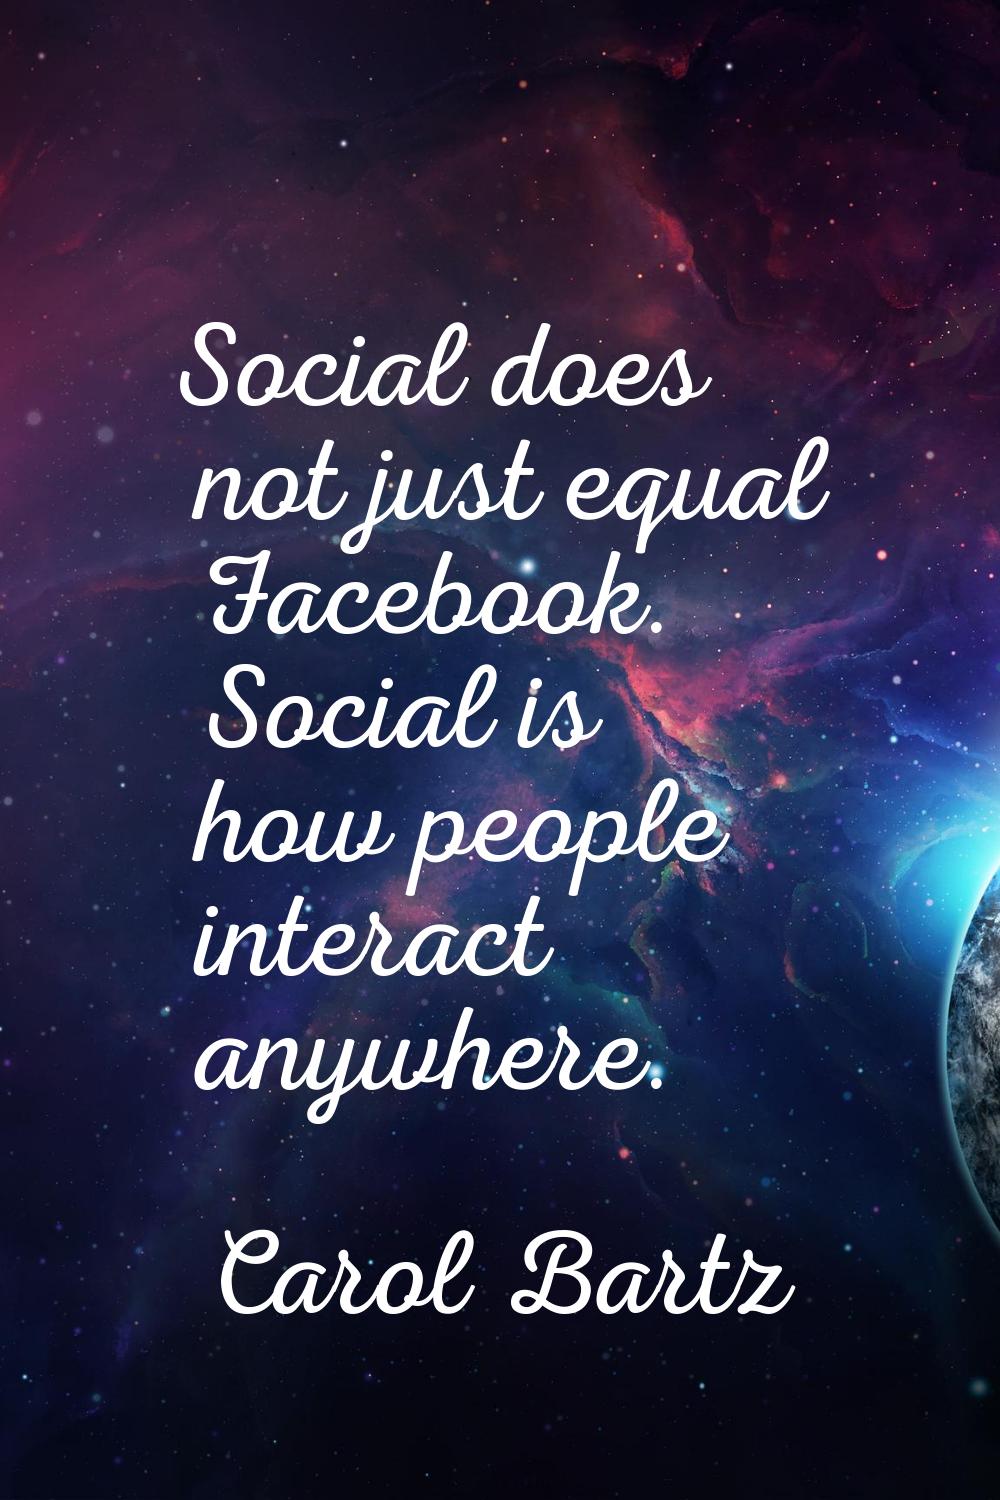 Social does not just equal Facebook. Social is how people interact anywhere.